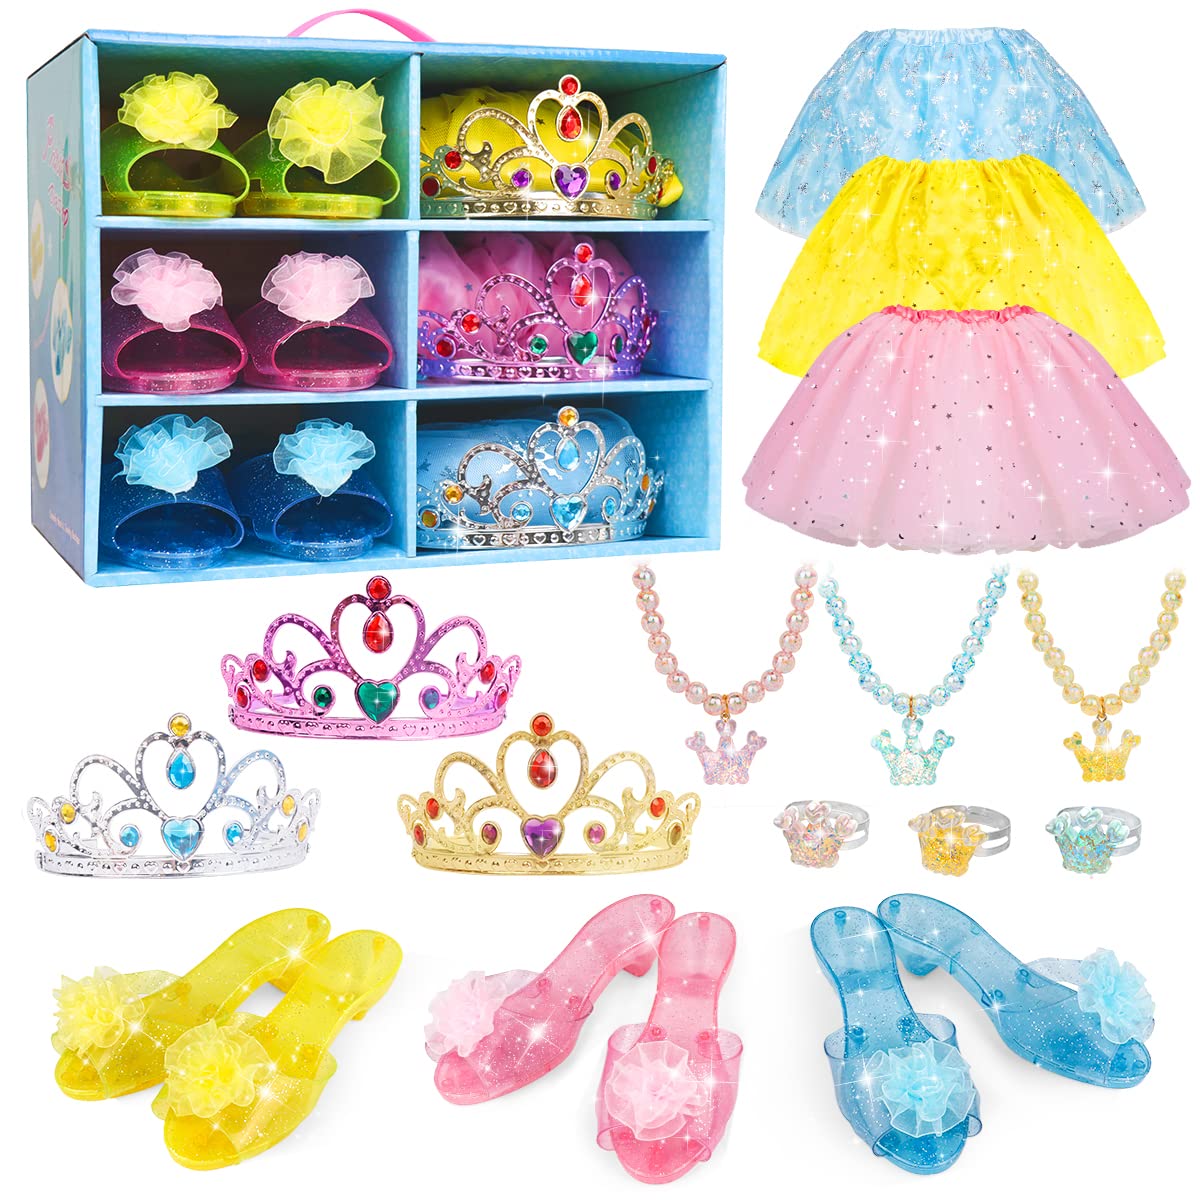 Meland Princess Dress Up - Dress Up Clothes for Little Girls - Kids Dress Up & Pretend Play with 3 Skirts, 3 Pairs of Princess Shoes, 3 Tiaras, Jewelry - Princess Toys for Girls Age 3,4,5,6 Year Old